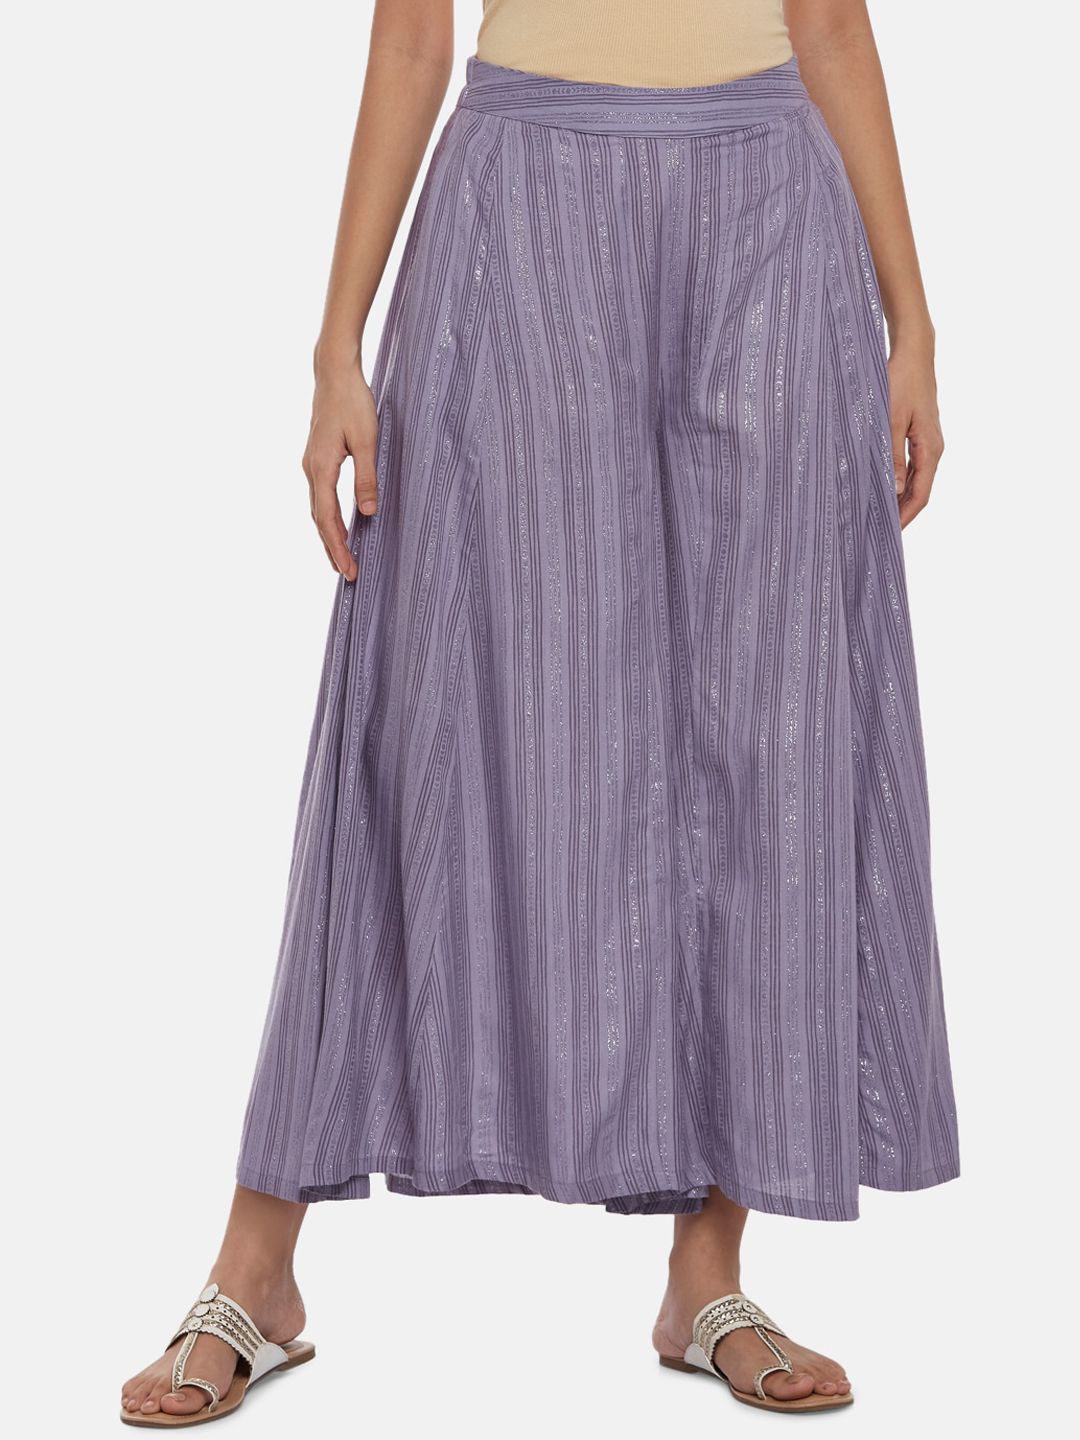 AKKRITI BY PANTALOONS Women Lavender Pleated Culottes Trousers Price in India